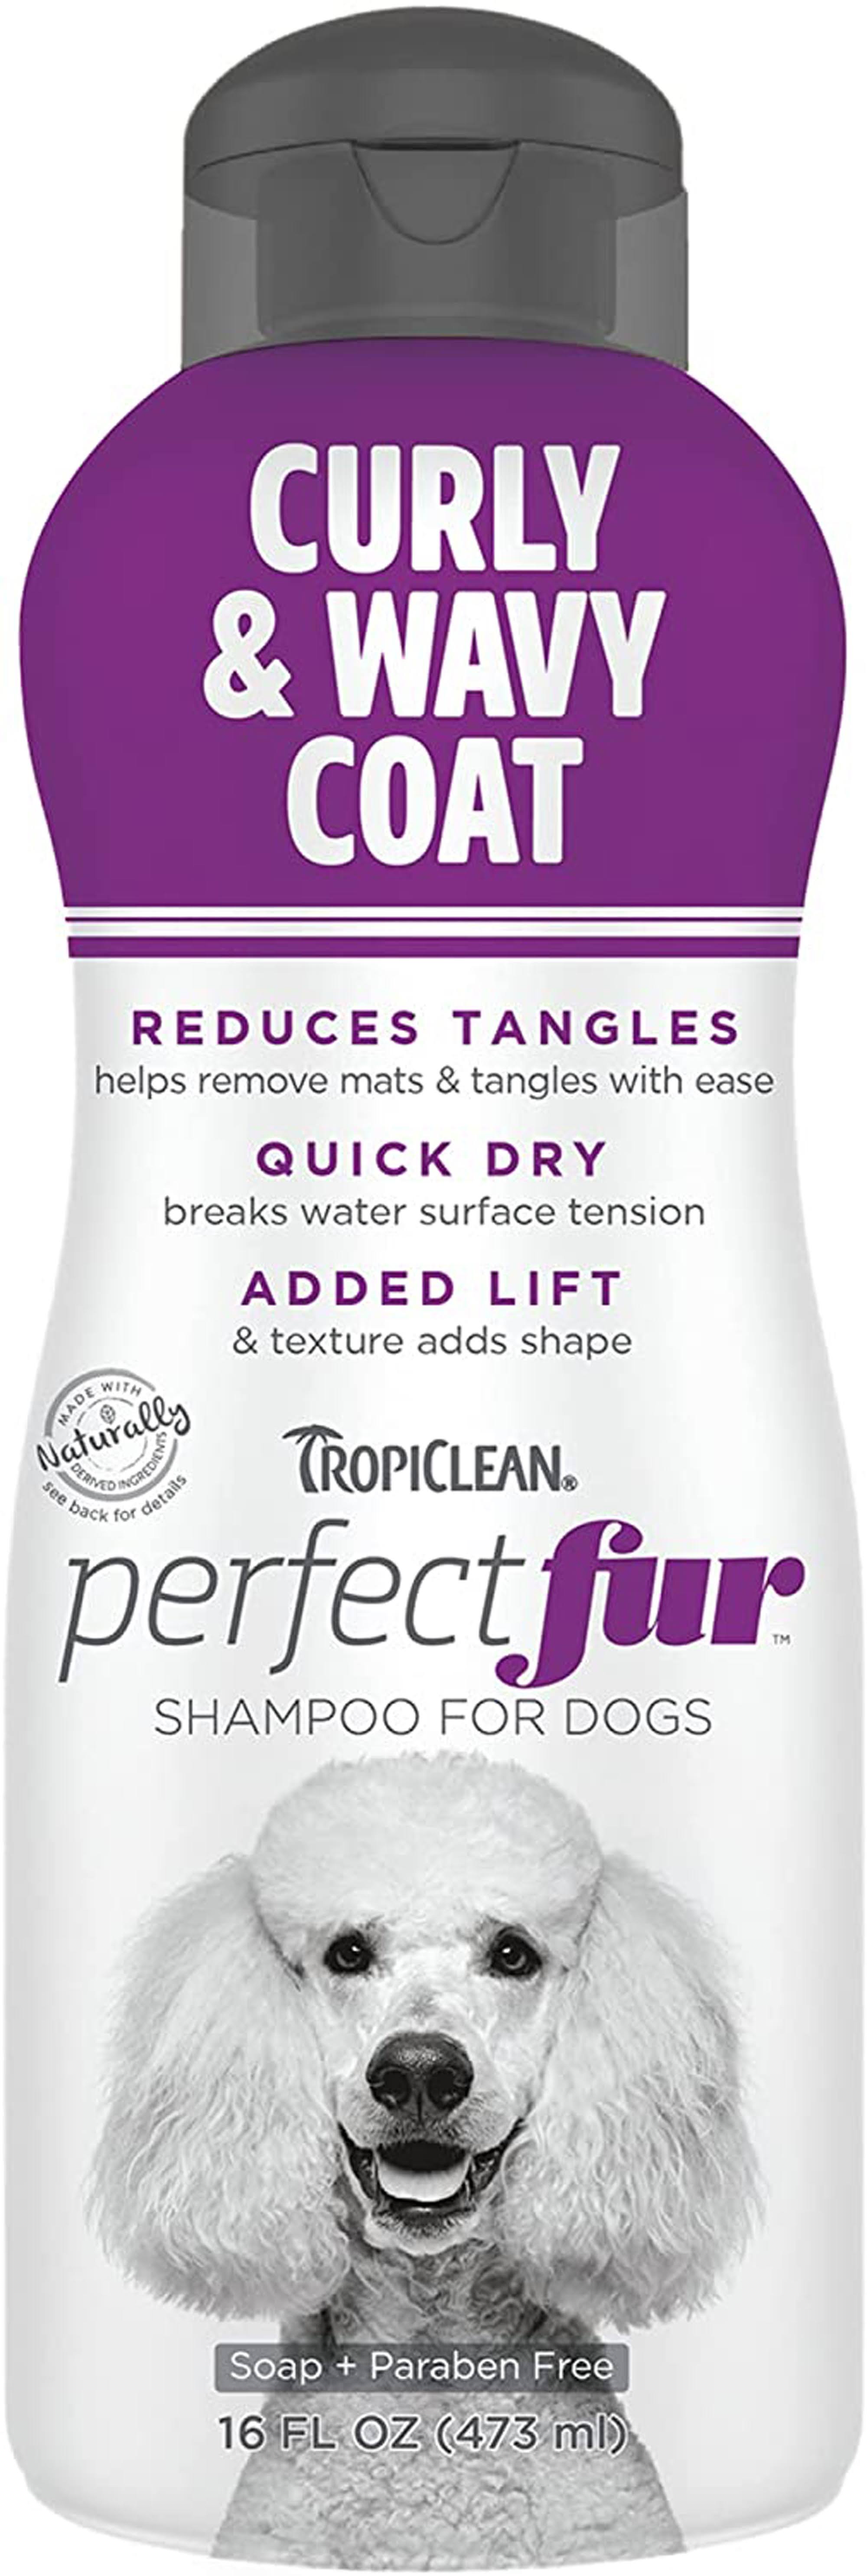 TropiClean Perfect Fur Curly & Wavy Coat Shampoo for Dogs 473ml